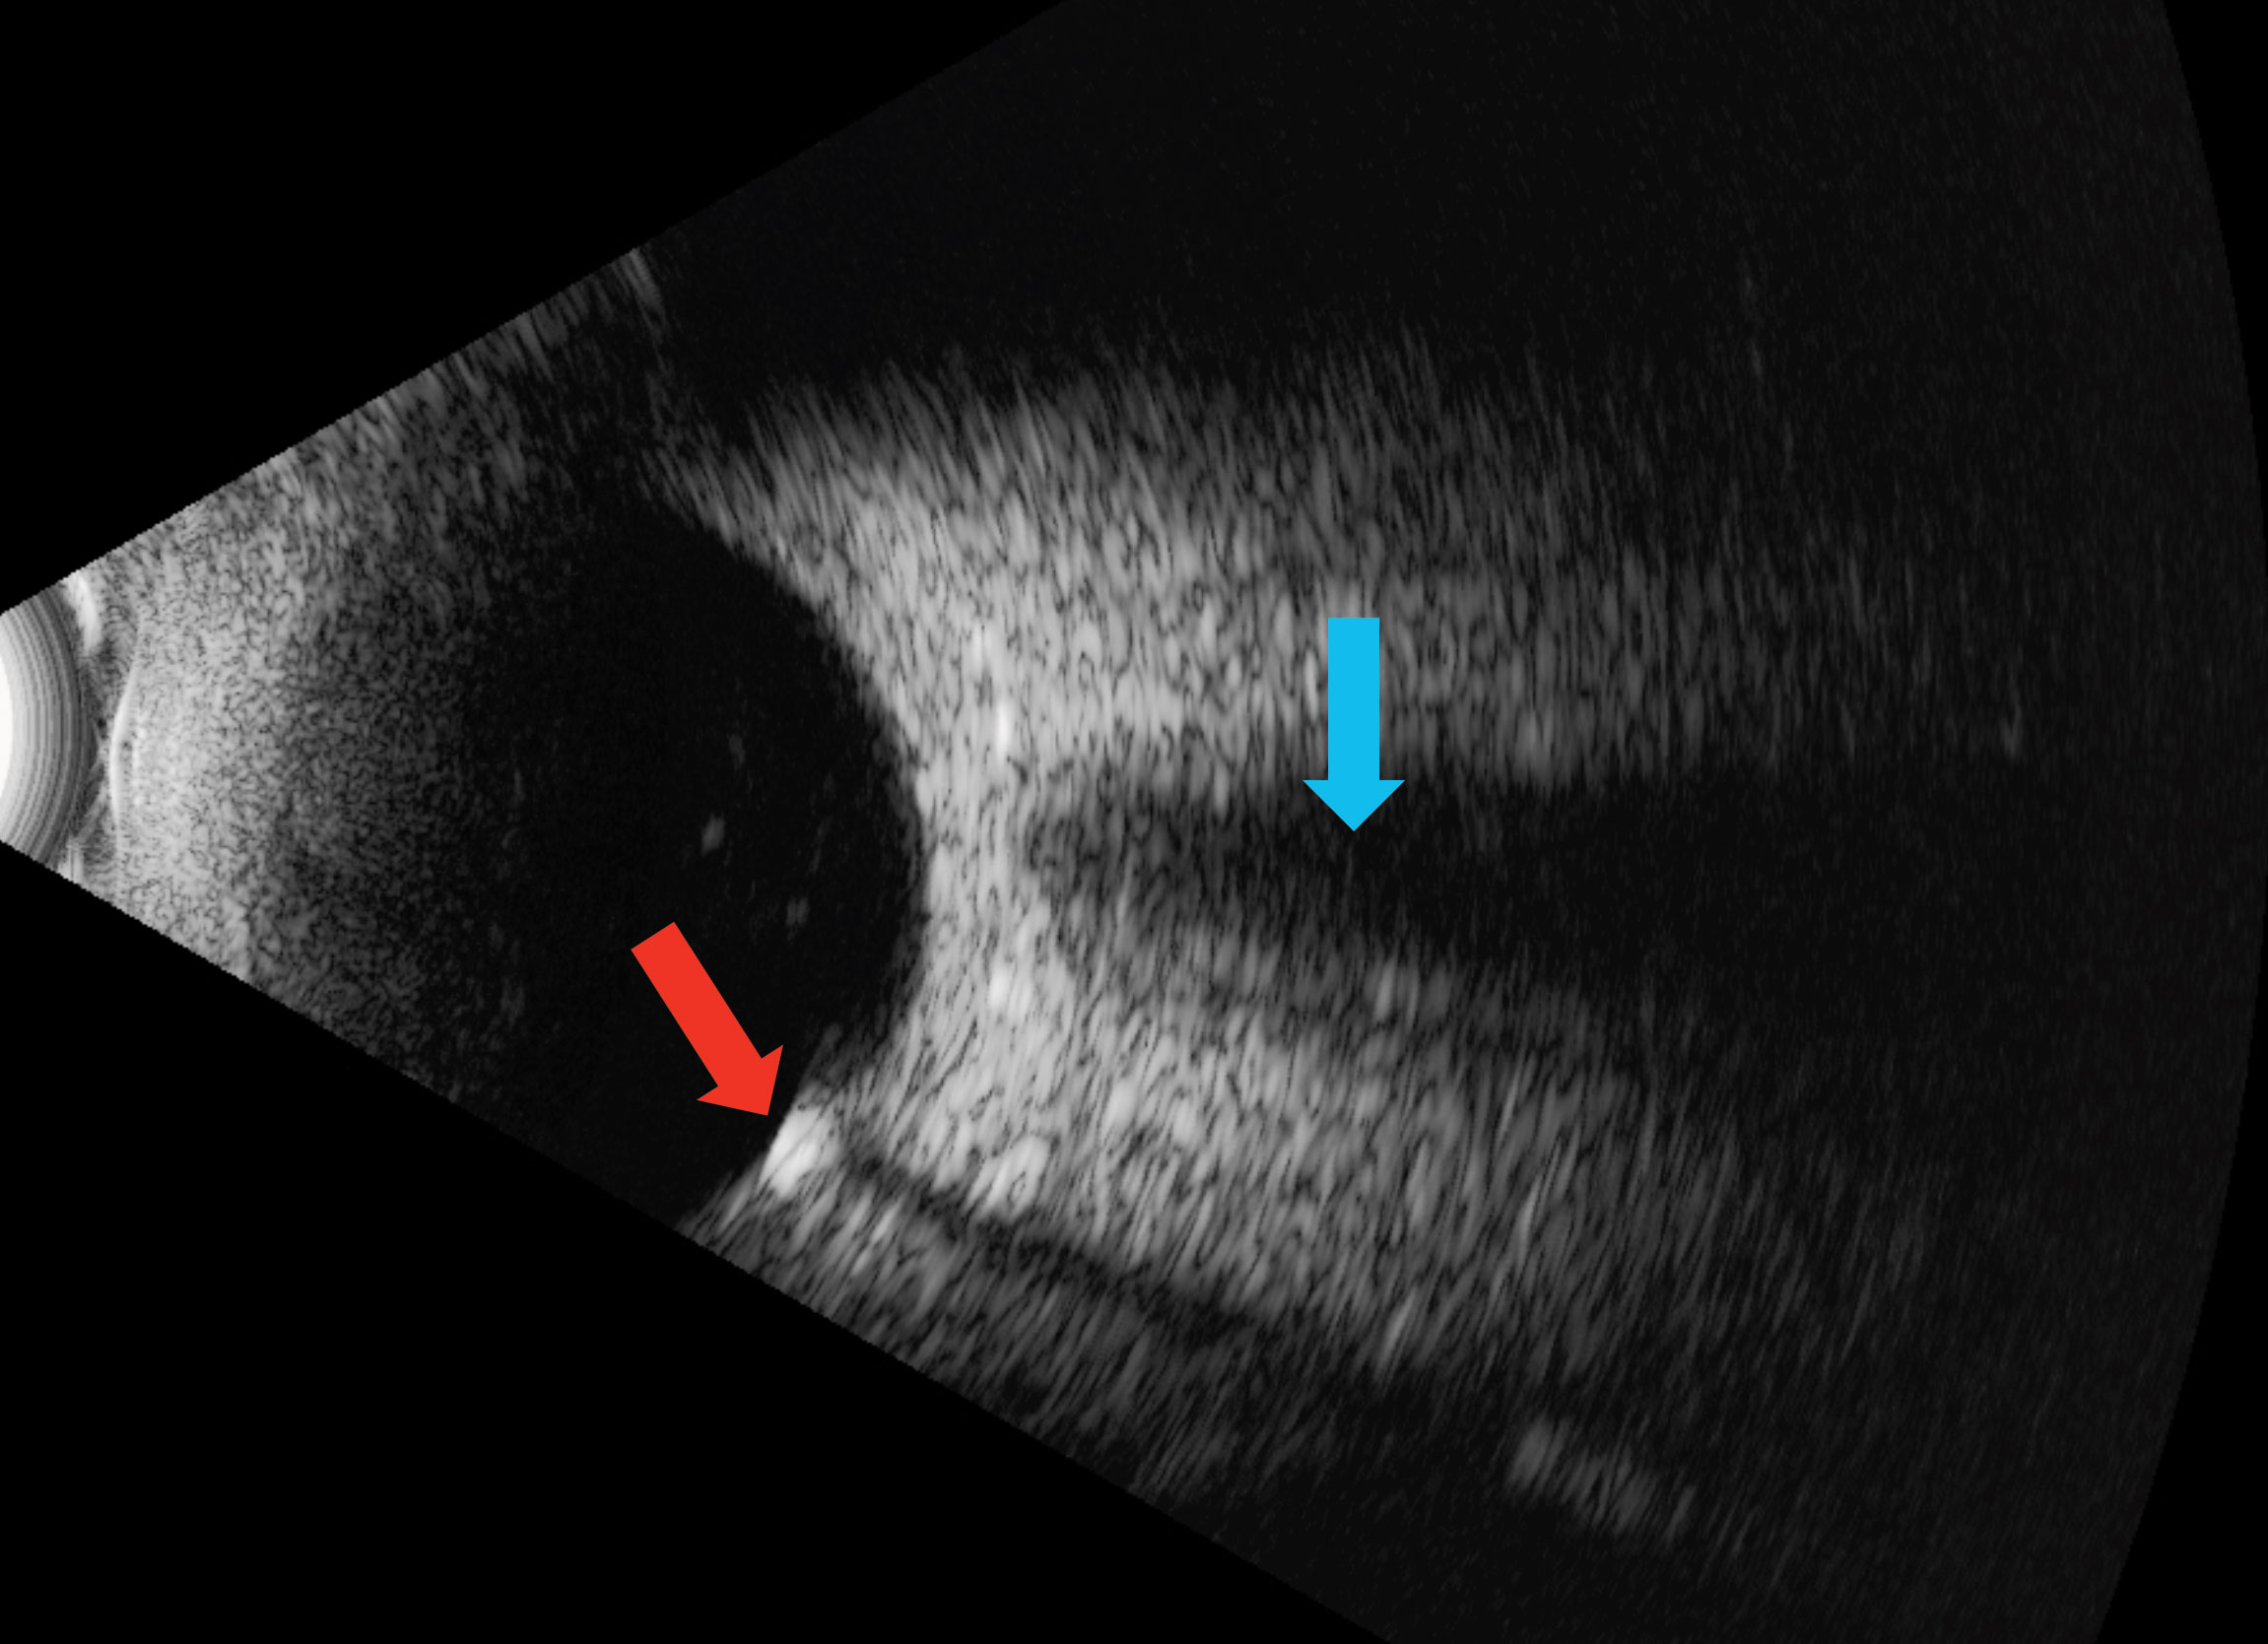 The red arrow shows an echo-dense placoid lesion while, the blue shows acoustic orbital shadowing on this B-scan ultrasound.